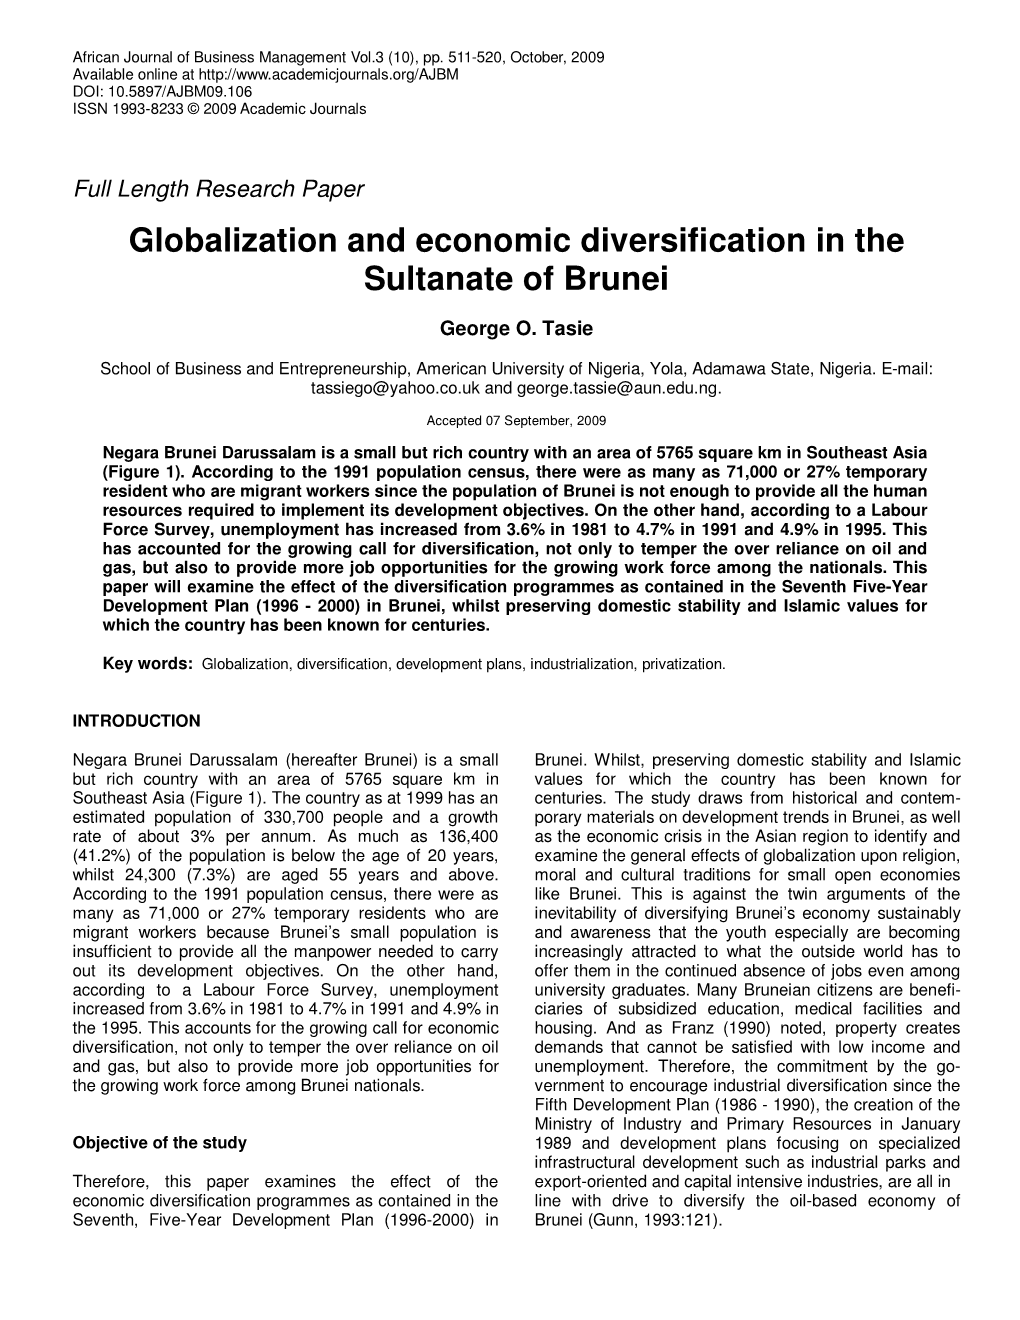 Globalization and Economic Diversification in the Sultanate of Brunei